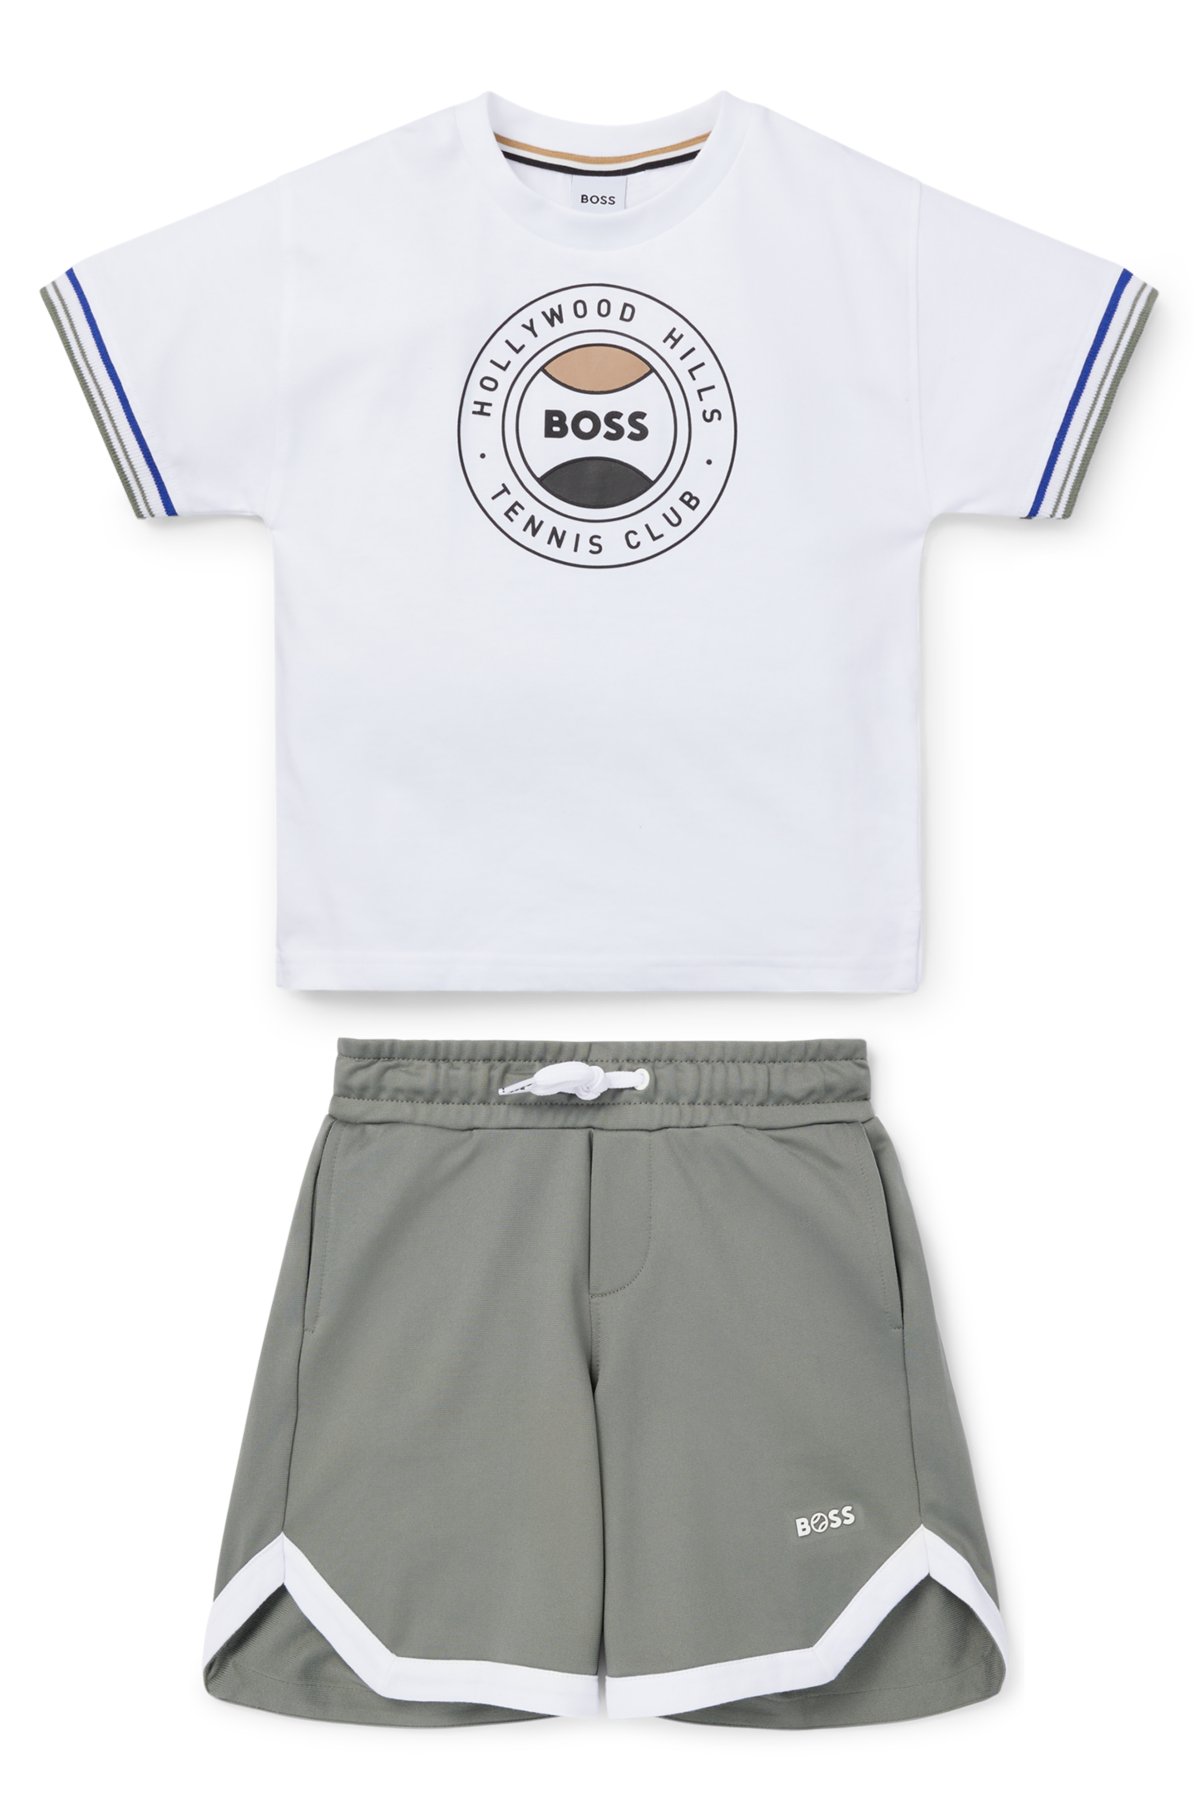 BOSS - Kids\' shorts and T-shirt set with tennnis-inspired artwork